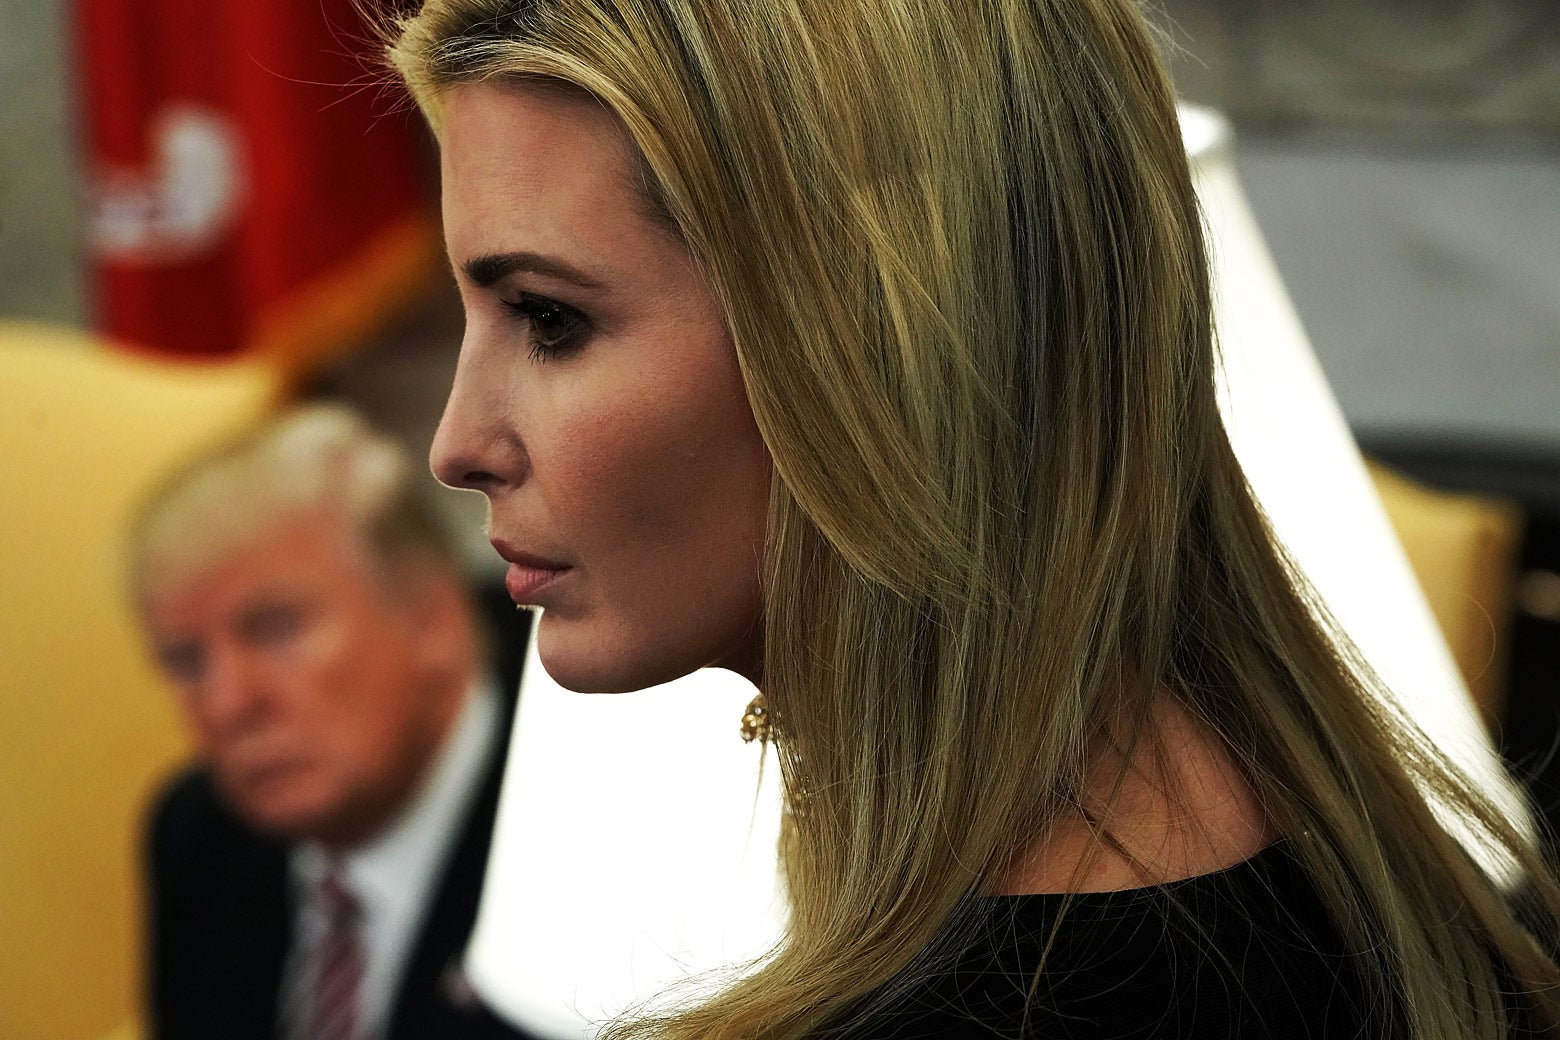 U.S. President Donald Trump (L) and adviser and daughter Ivanka Trump listen during a working session regarding the Opportunity Zones provided by tax reform in the Oval Office of the White House February 14, 2018 in Washington, DC. 